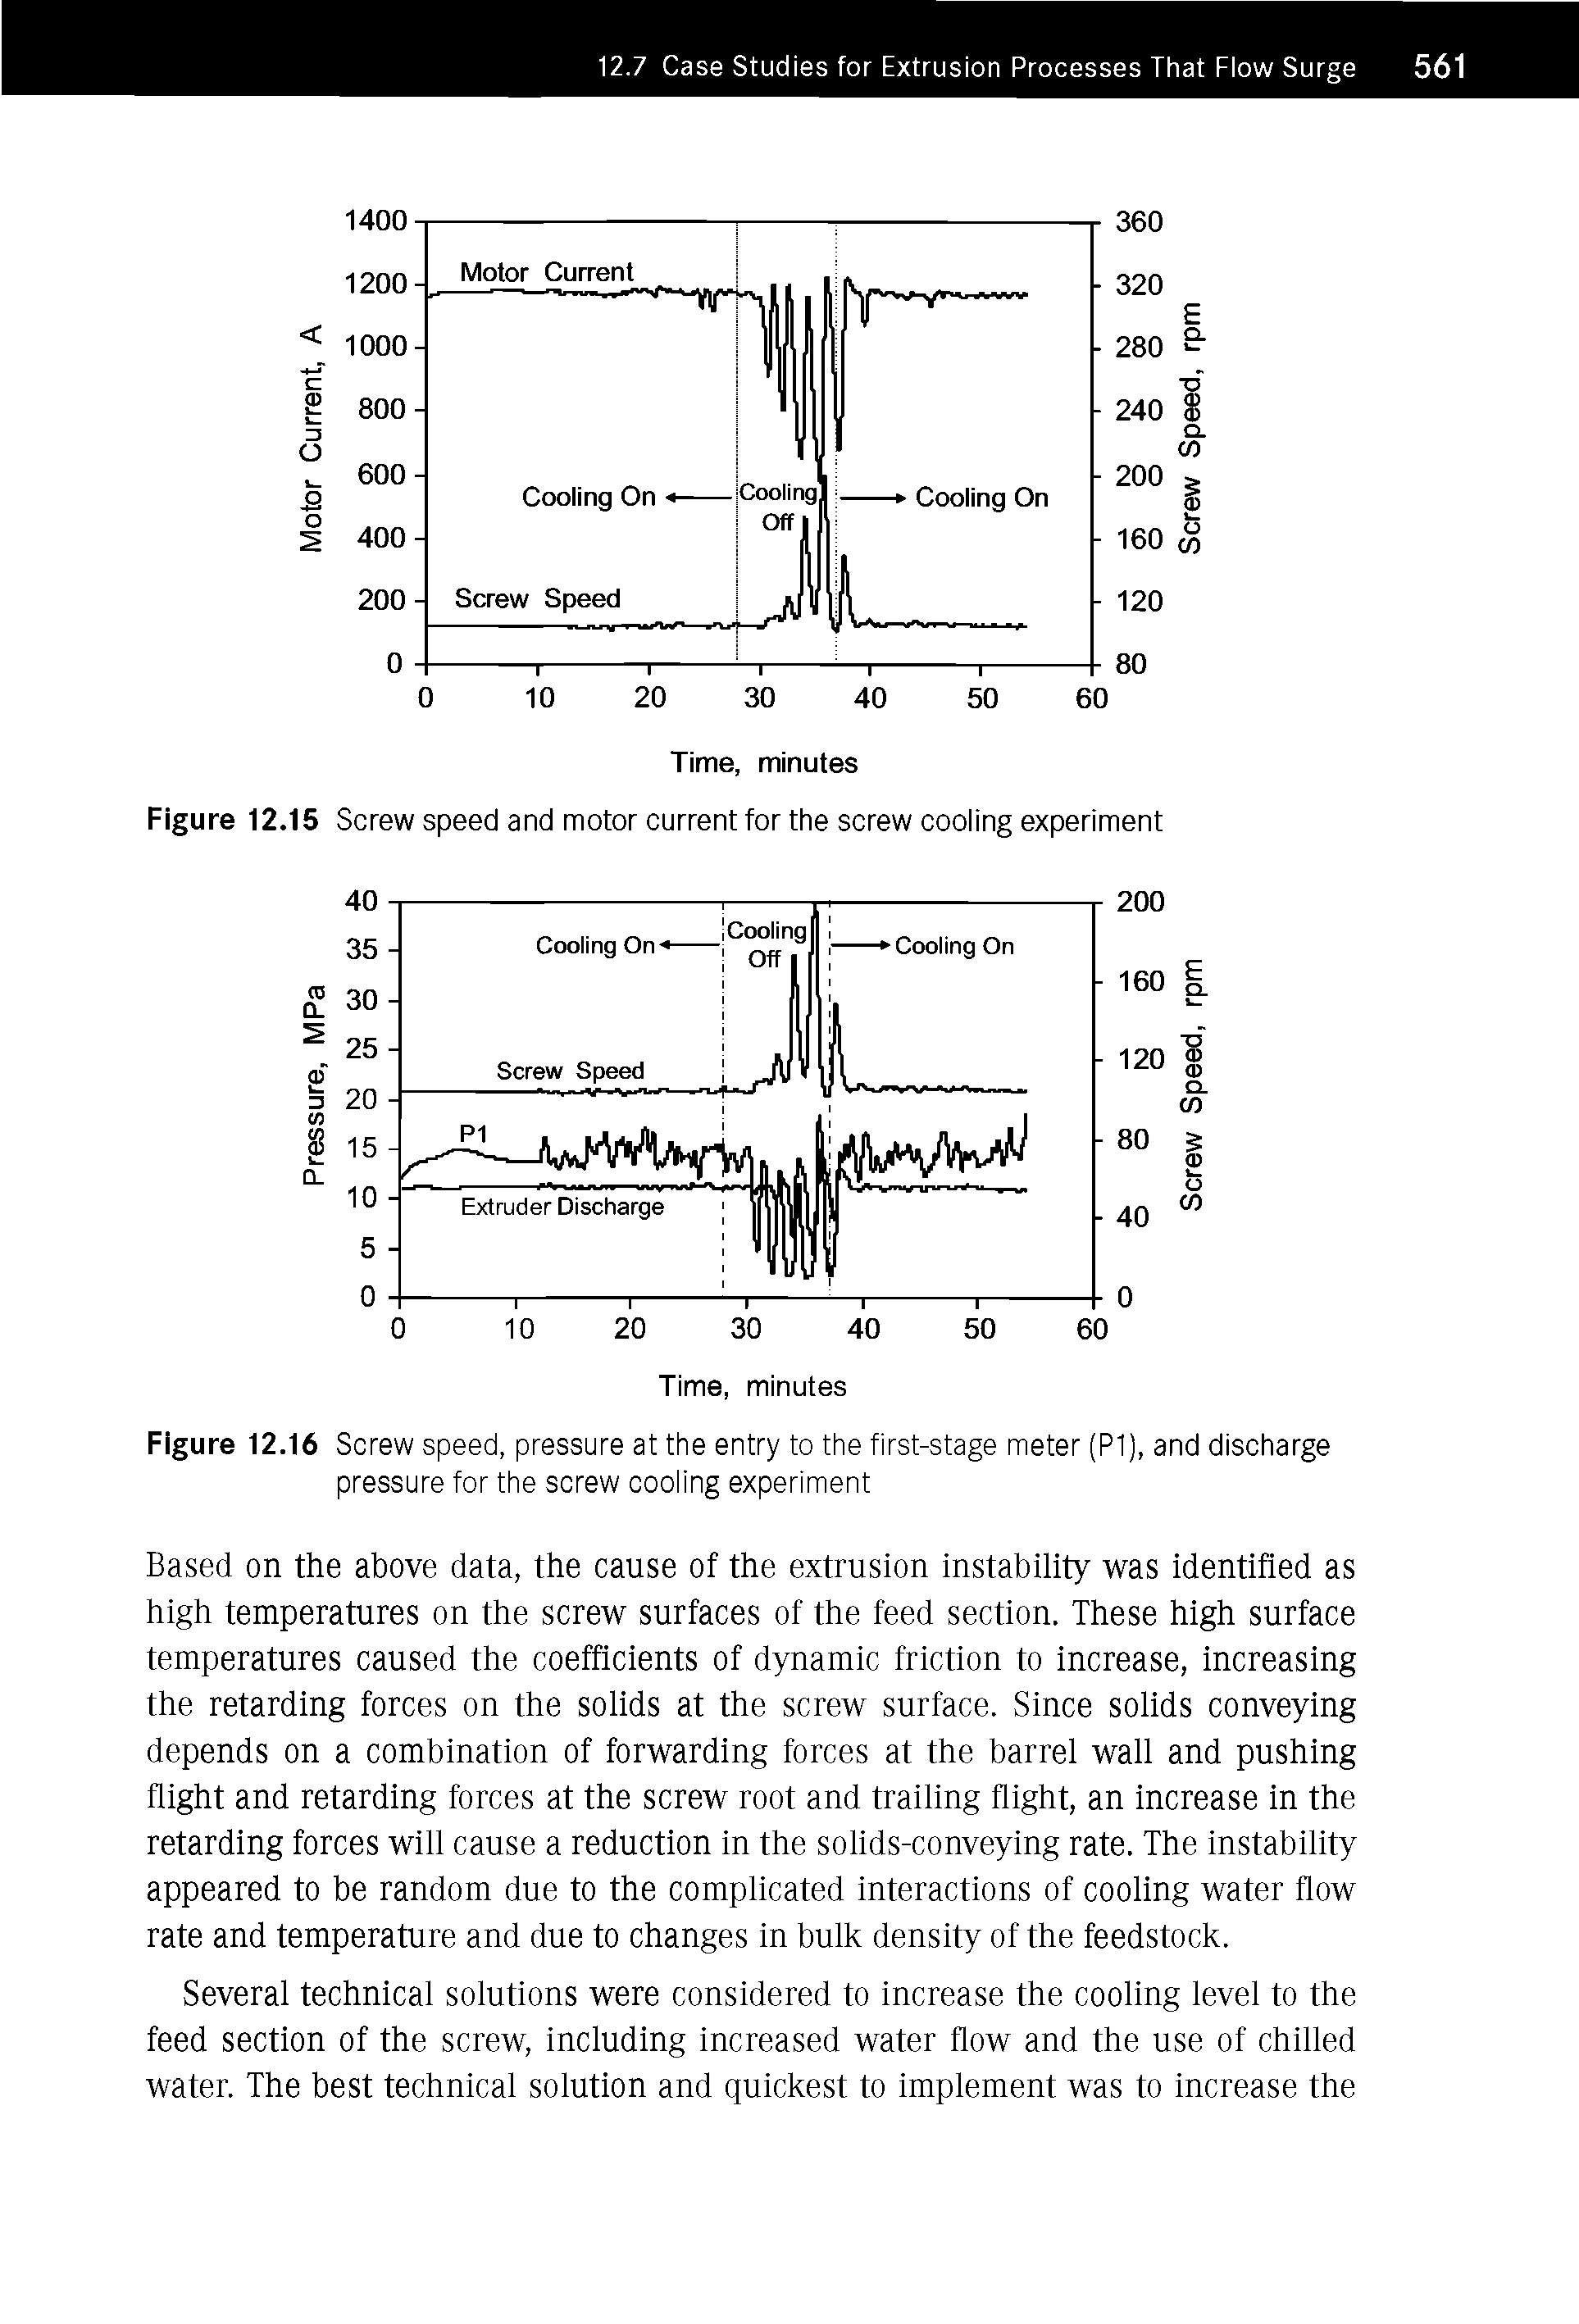 Figure 12.16 Screw speed, pressure at the entry to the first-stage meter (PI), and discharge pressure for the screw cooling experiment...